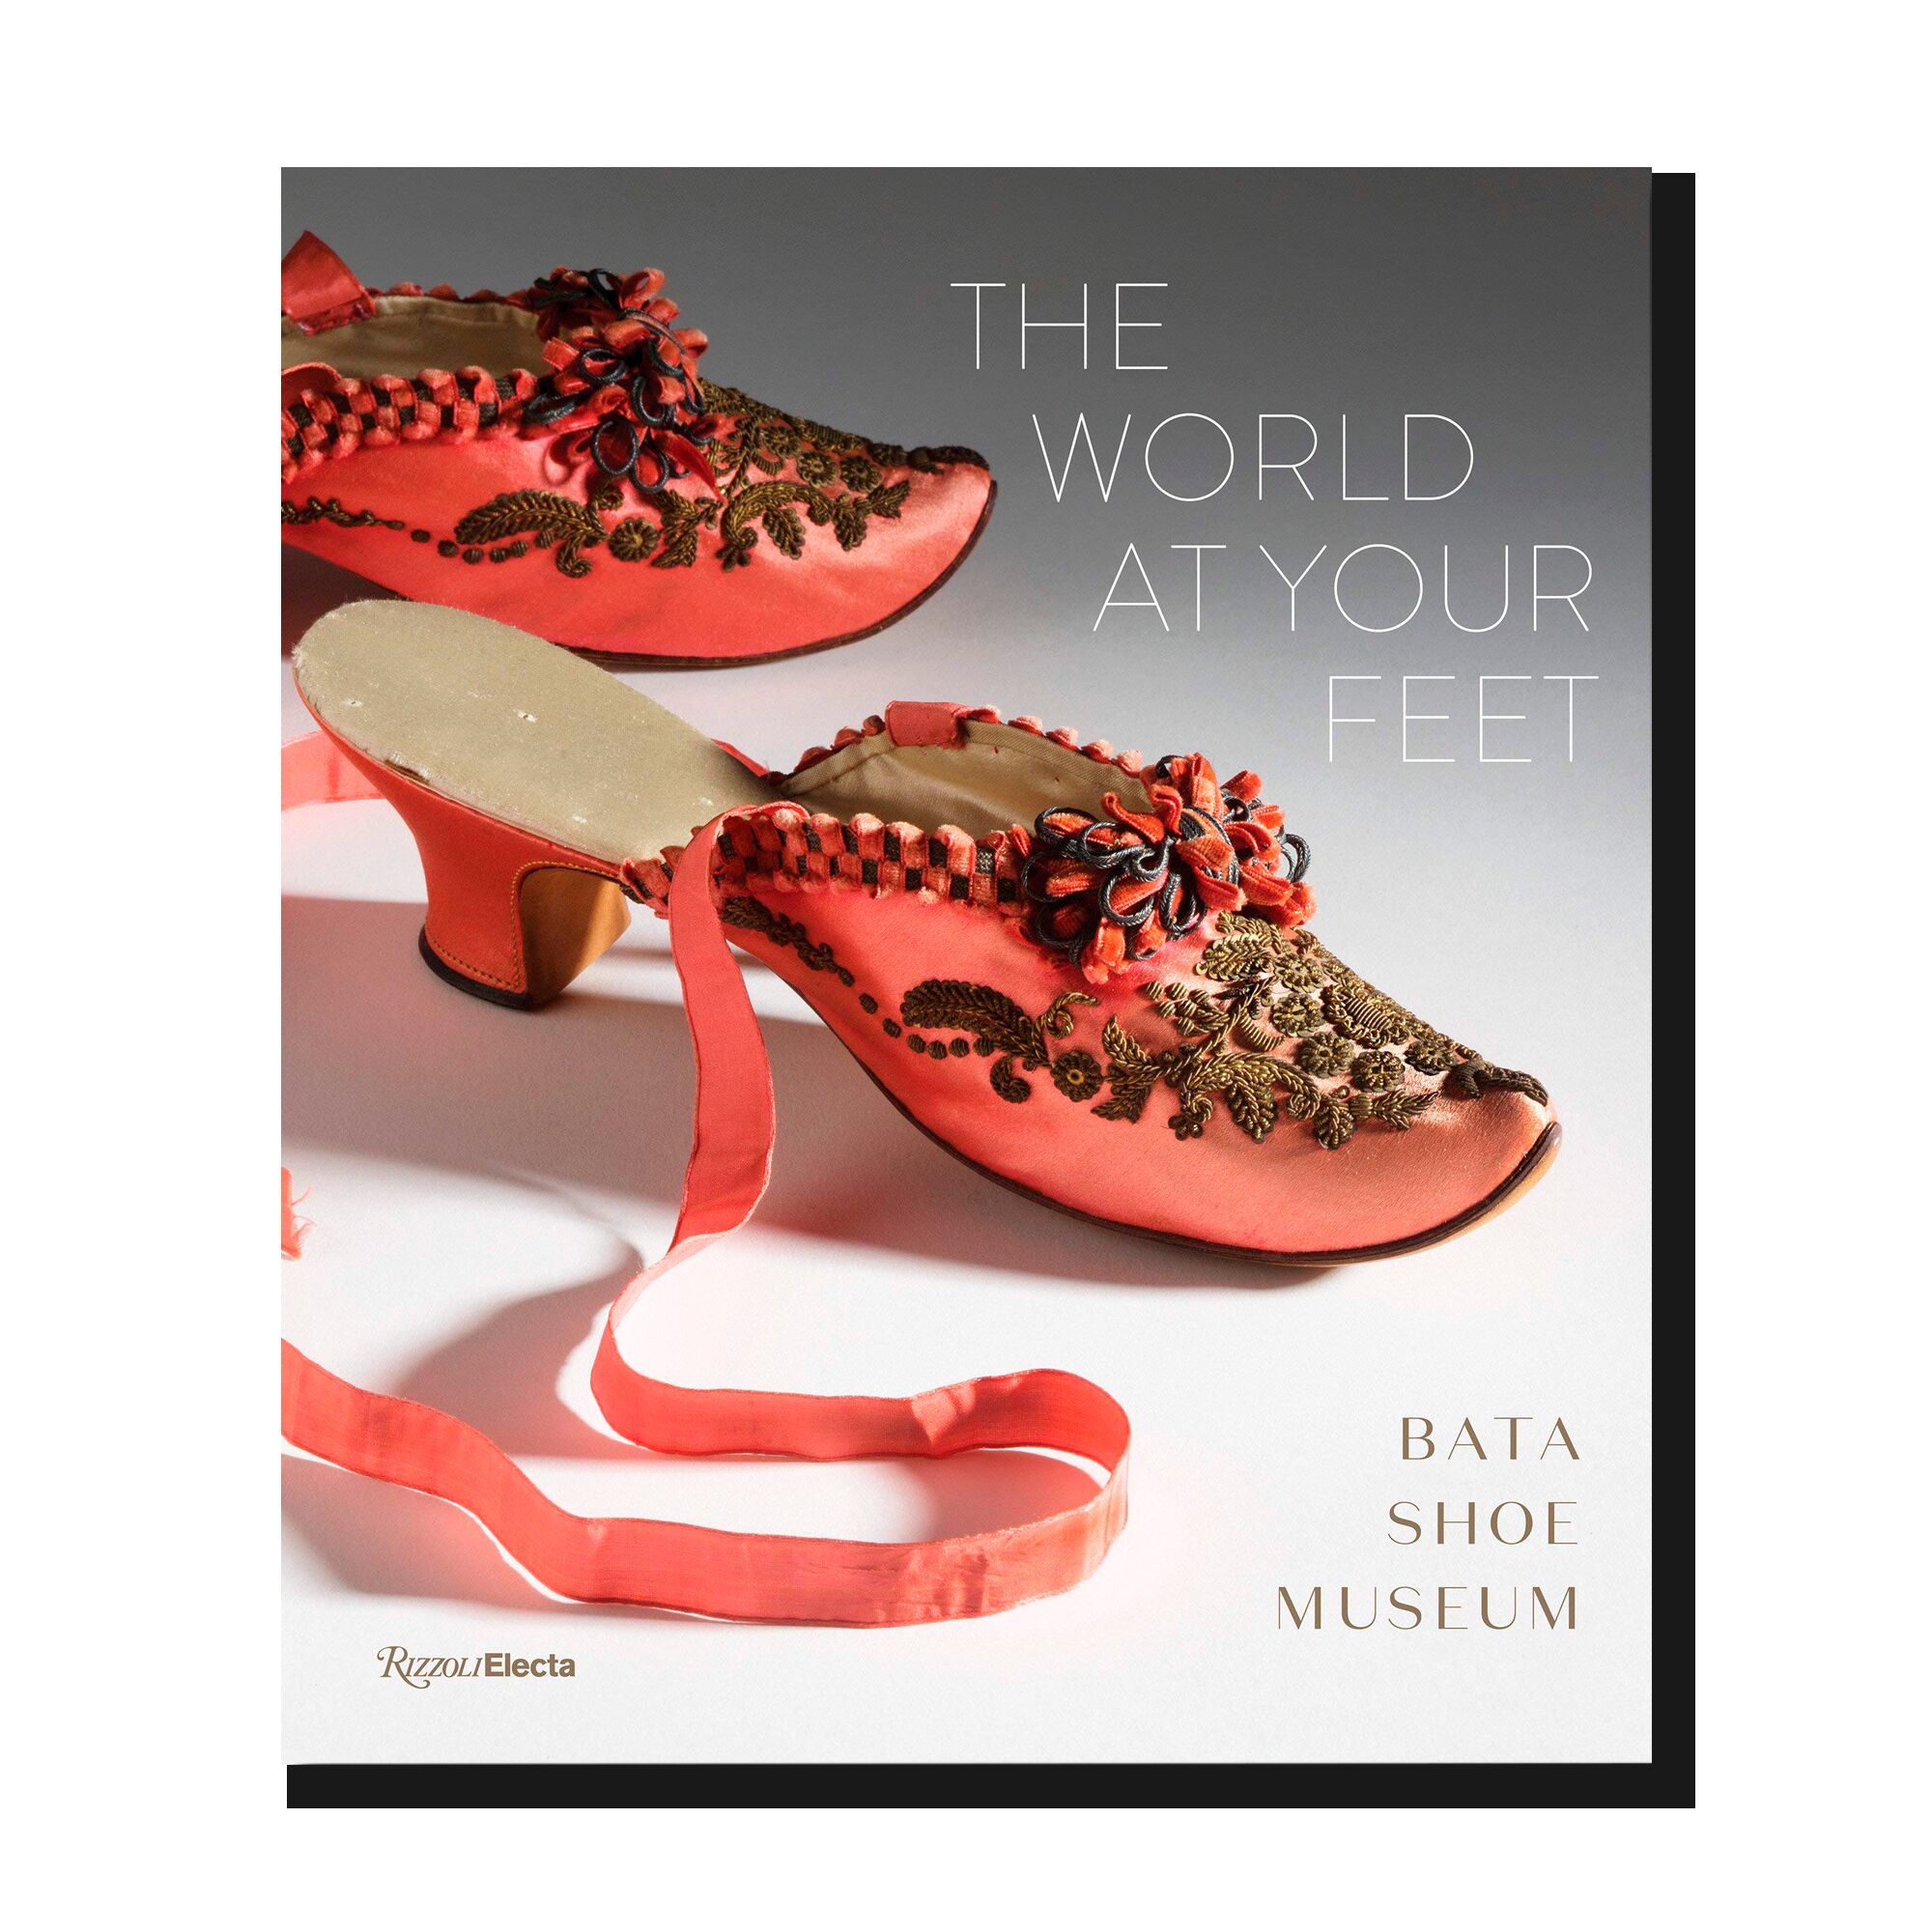 The World at Your Feet: Bata Shoe Museum